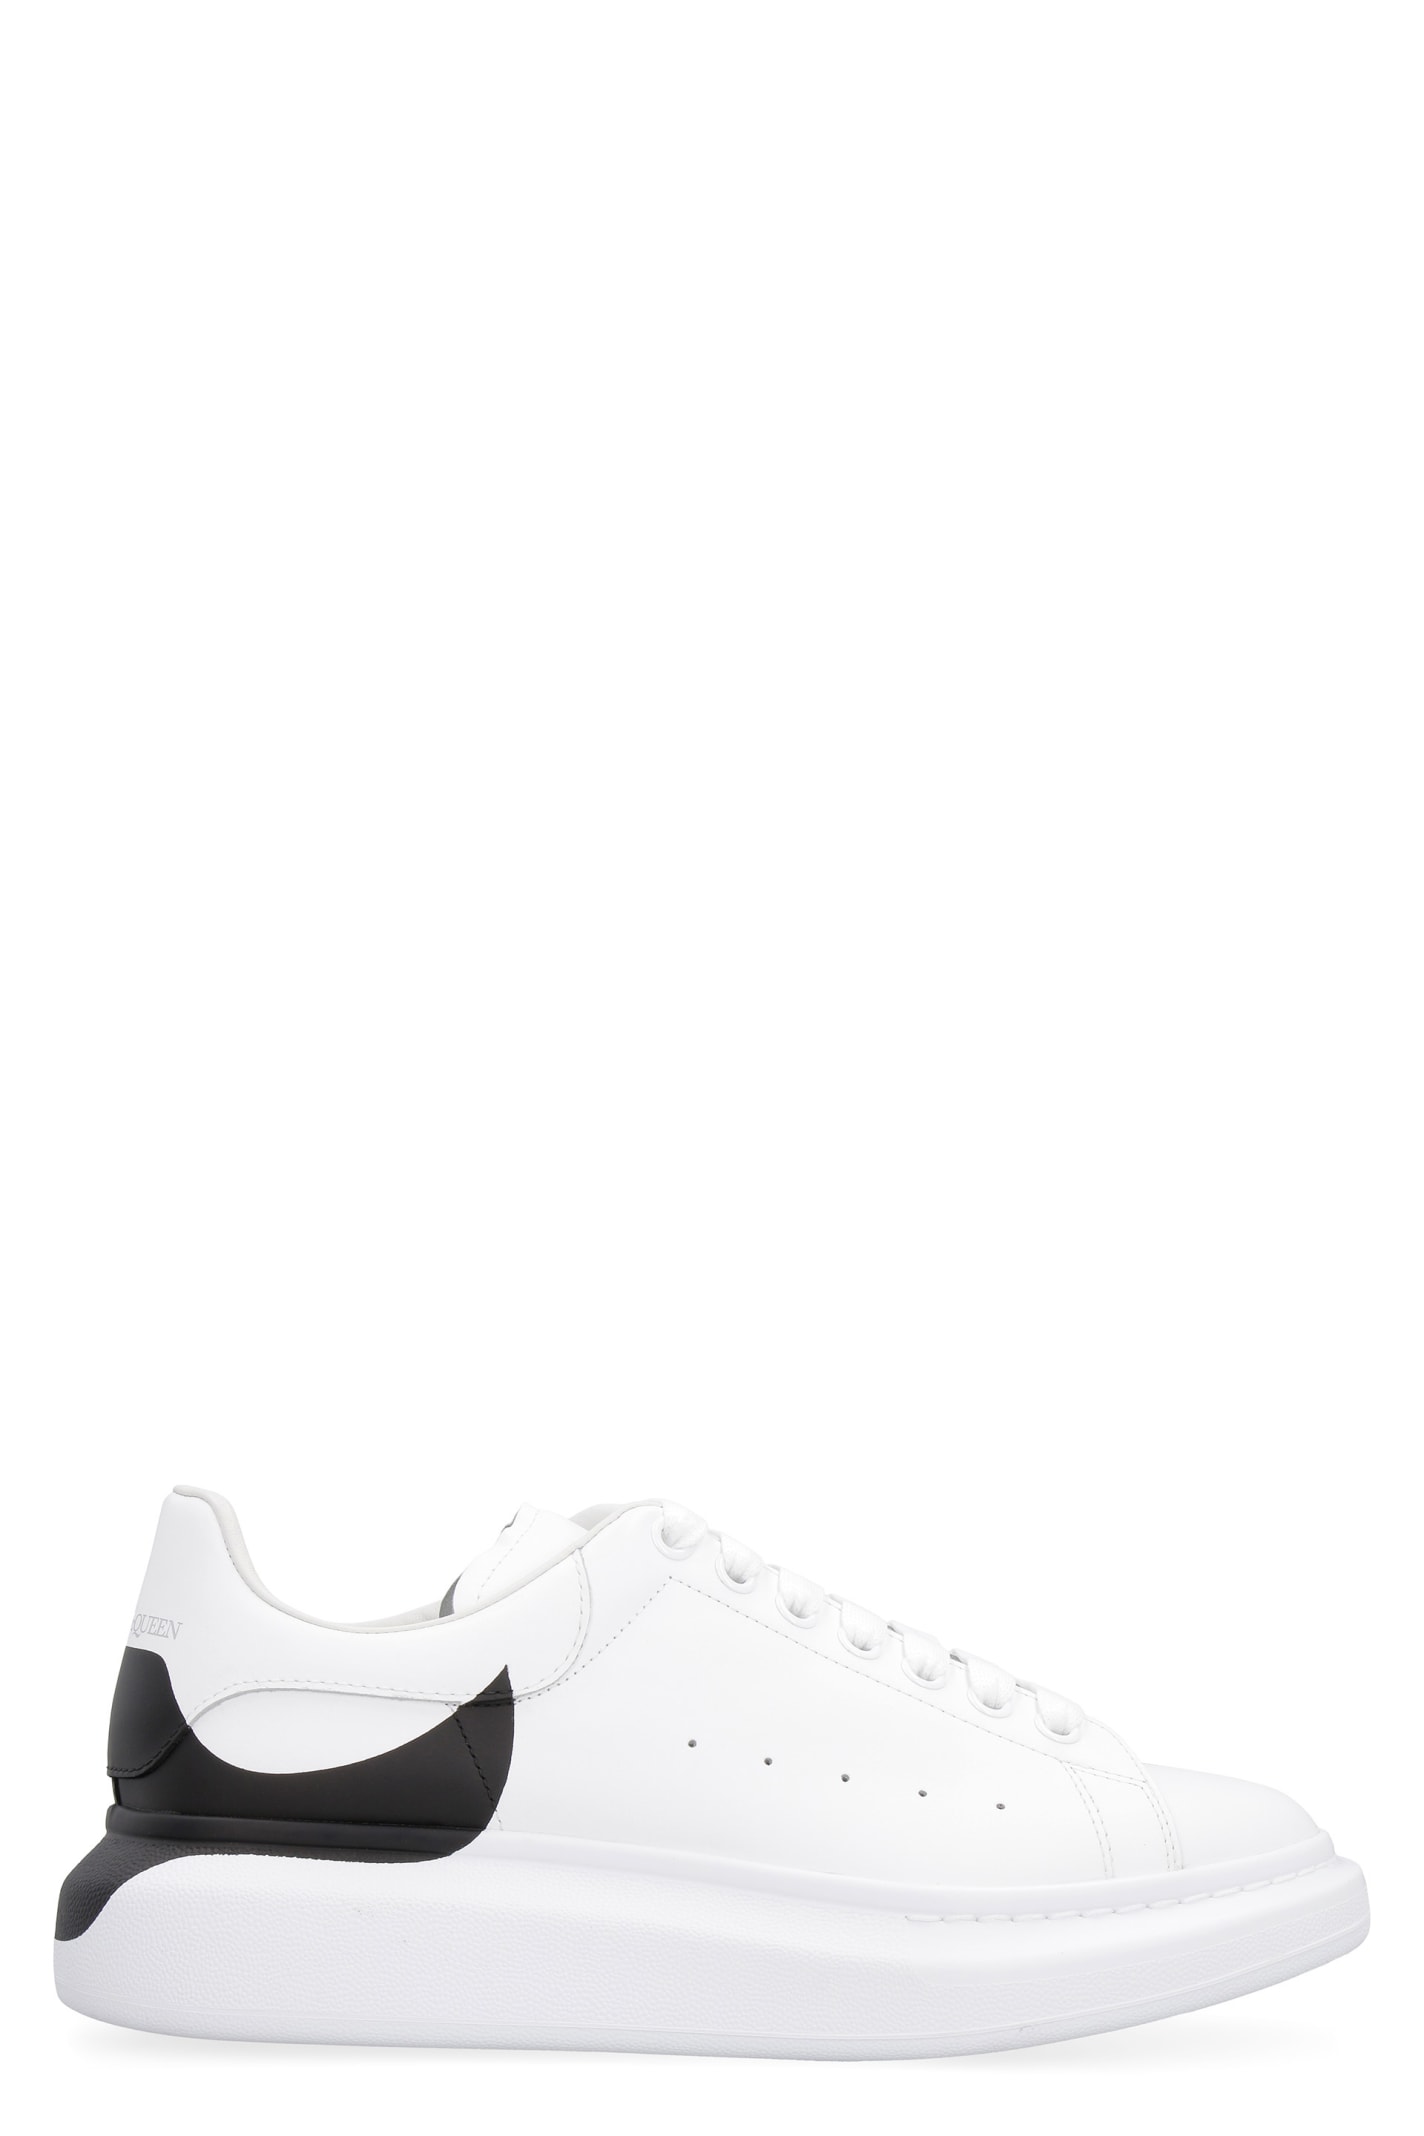 Alexander McQueen Larry Leather Chunky Sneakers